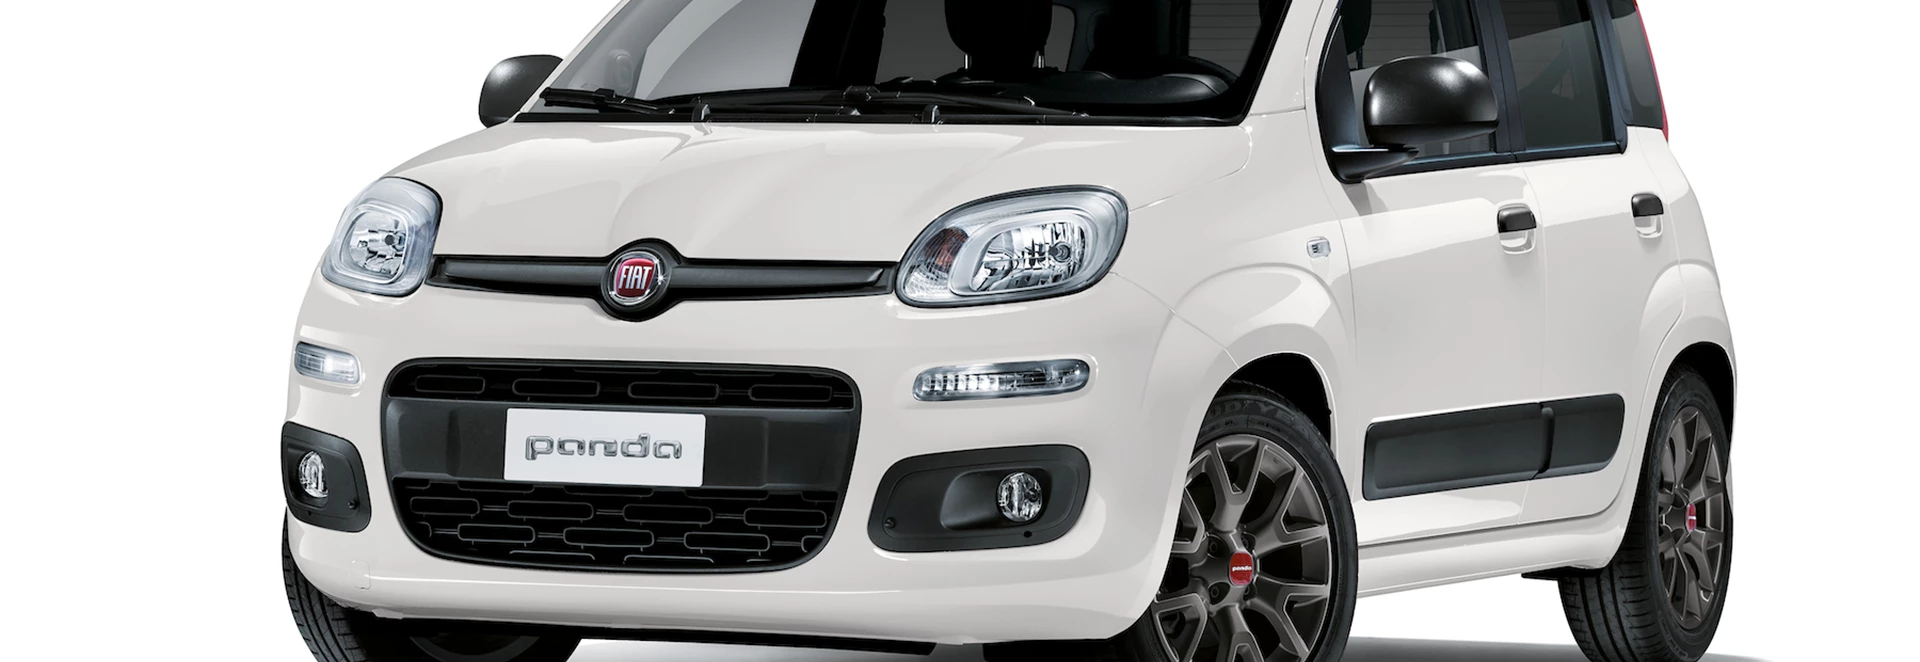 Fiat Panda Hybrid range is expanded with new ‘Easy’ variant 